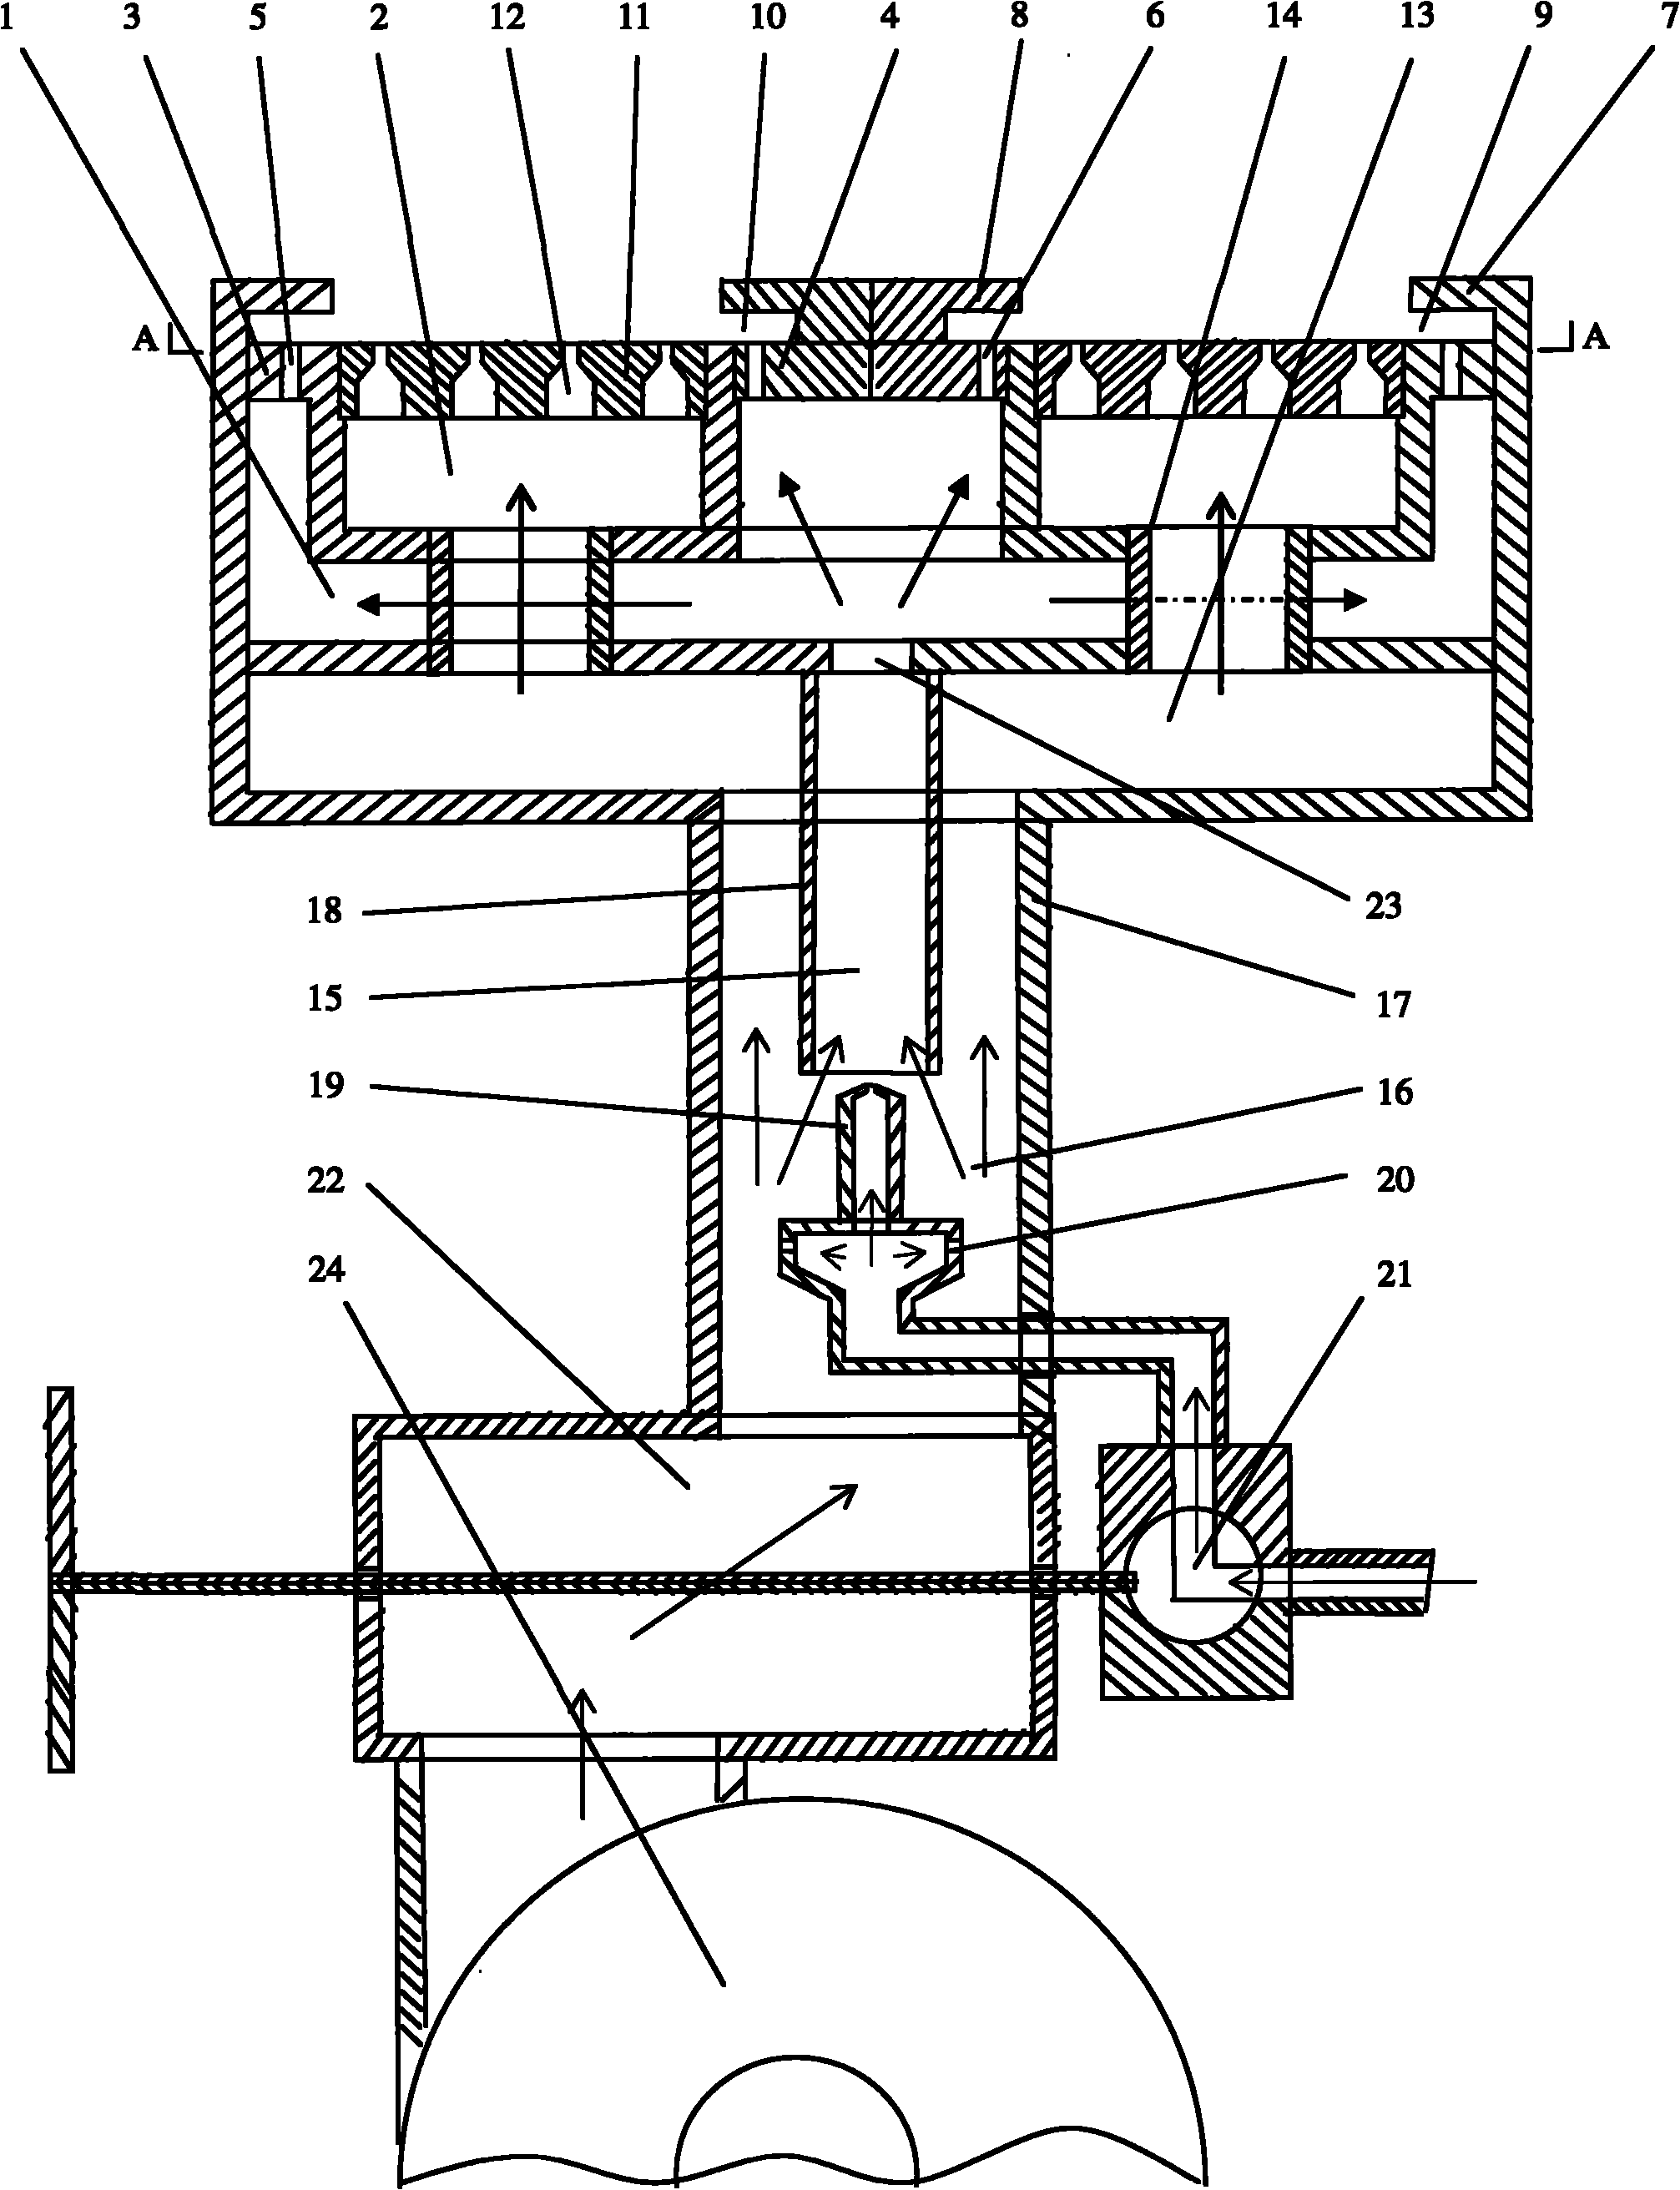 Combustor capable of improving combustion intensity and heat transfer intensity by utilizing auxiliary counter-flow flames